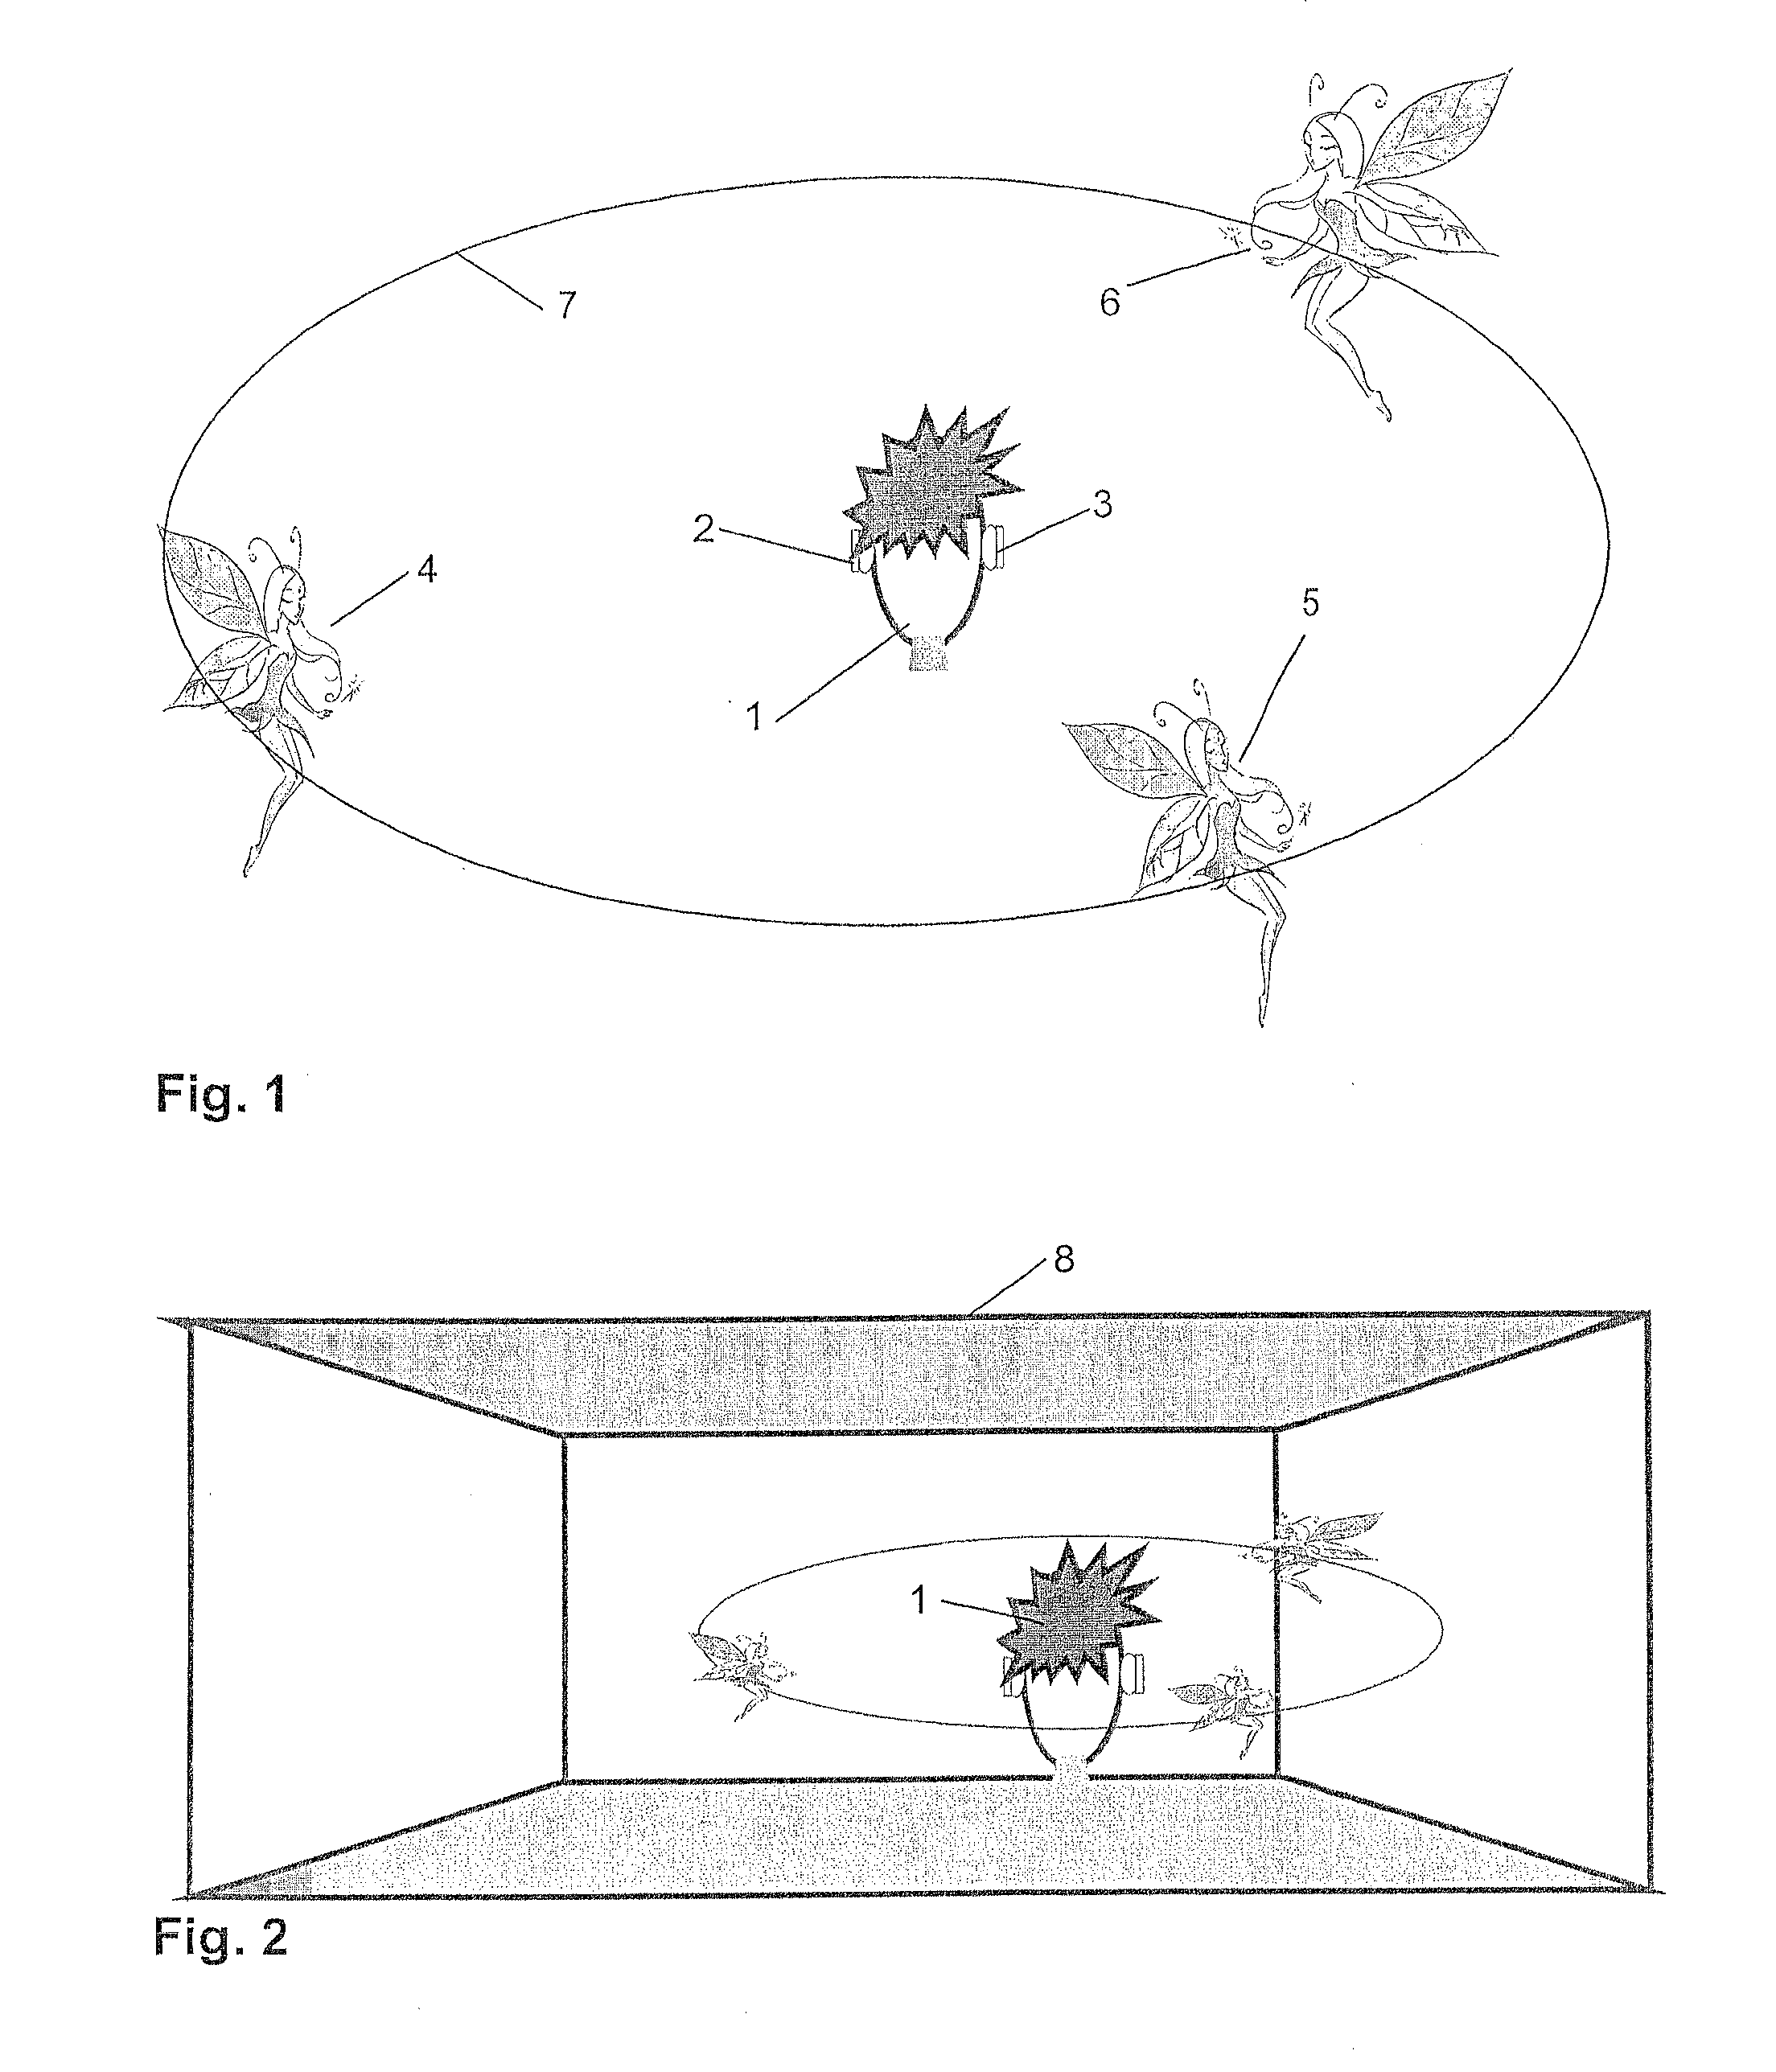 Method for Determining an Acoustic Property of an Environment